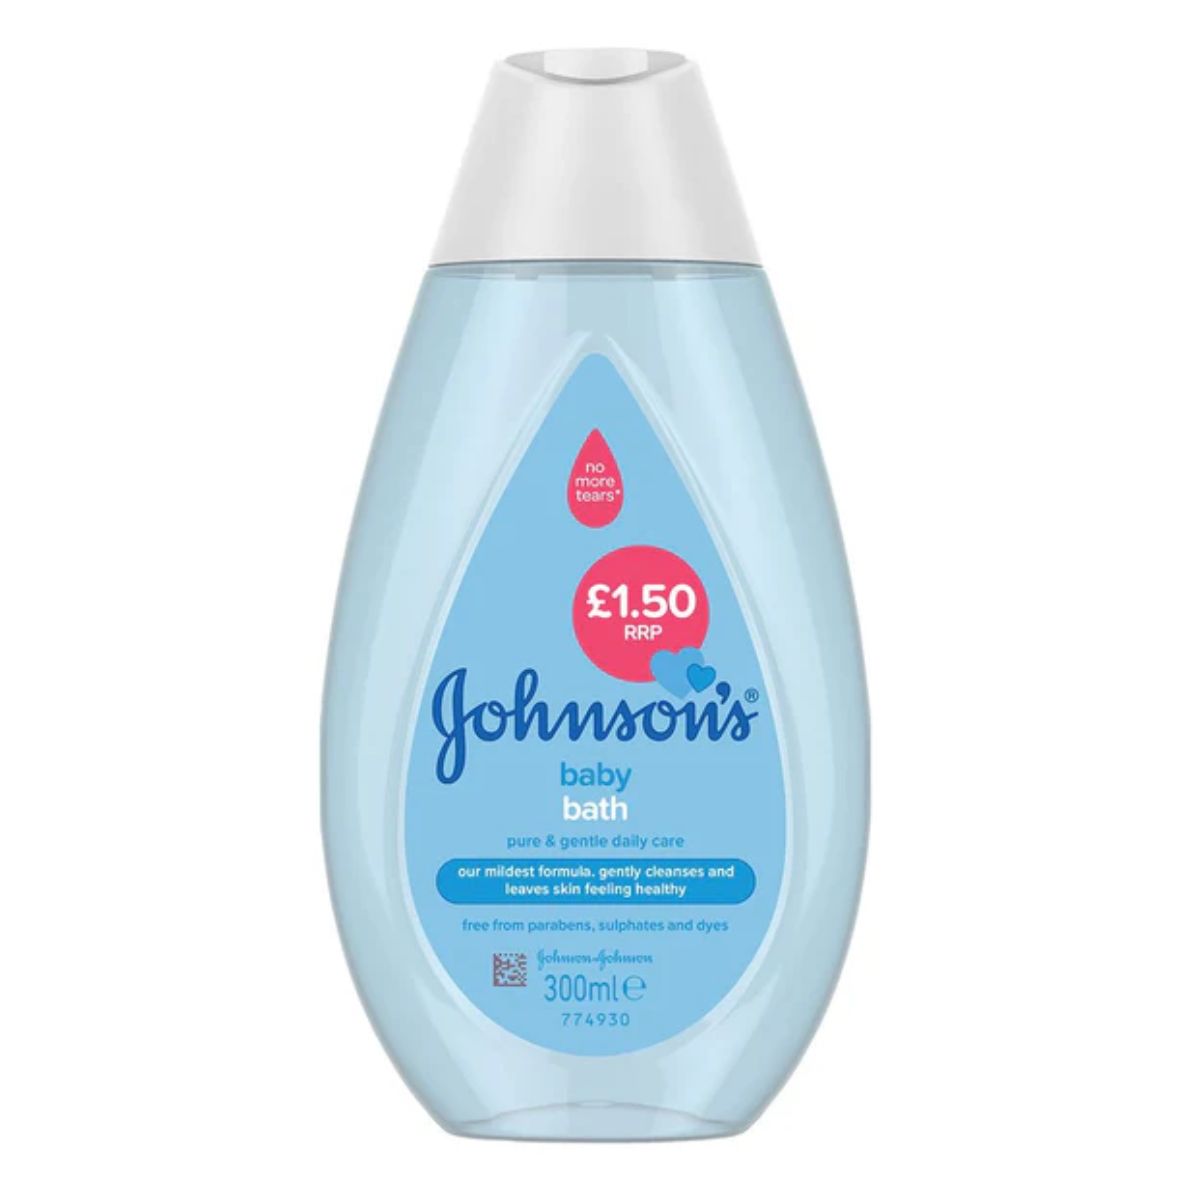 A bottle of Johnsons - Baby Bath - 300ml with a price label of £1.50, featuring a tear-free formula.